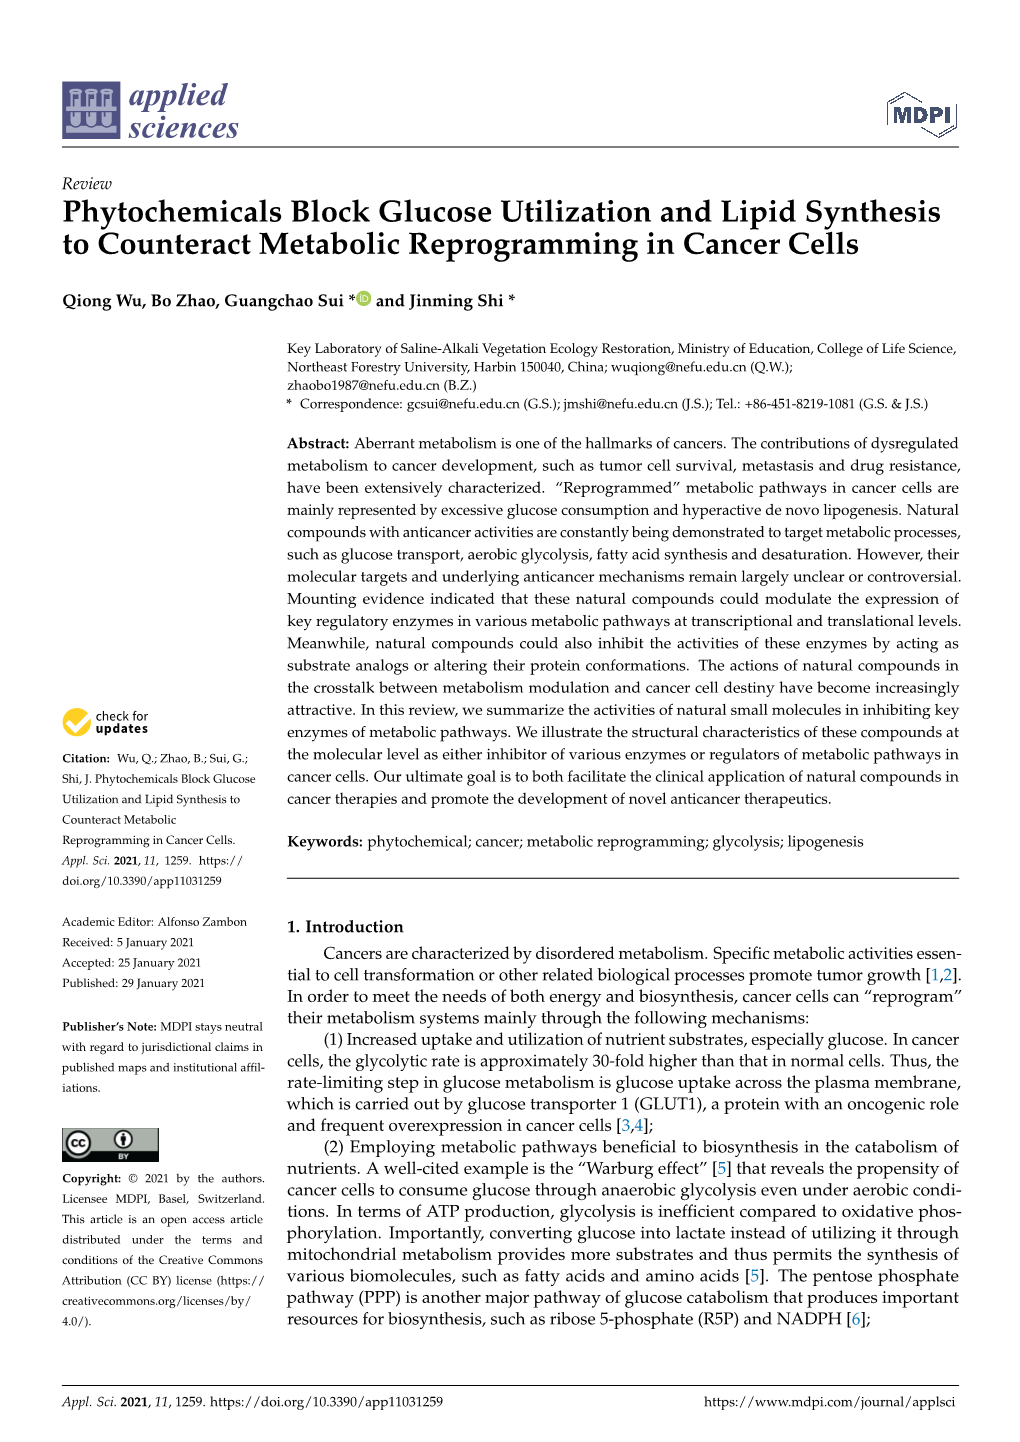 Phytochemicals Block Glucose Utilization and Lipid Synthesis to Counteract Metabolic Reprogramming in Cancer Cells